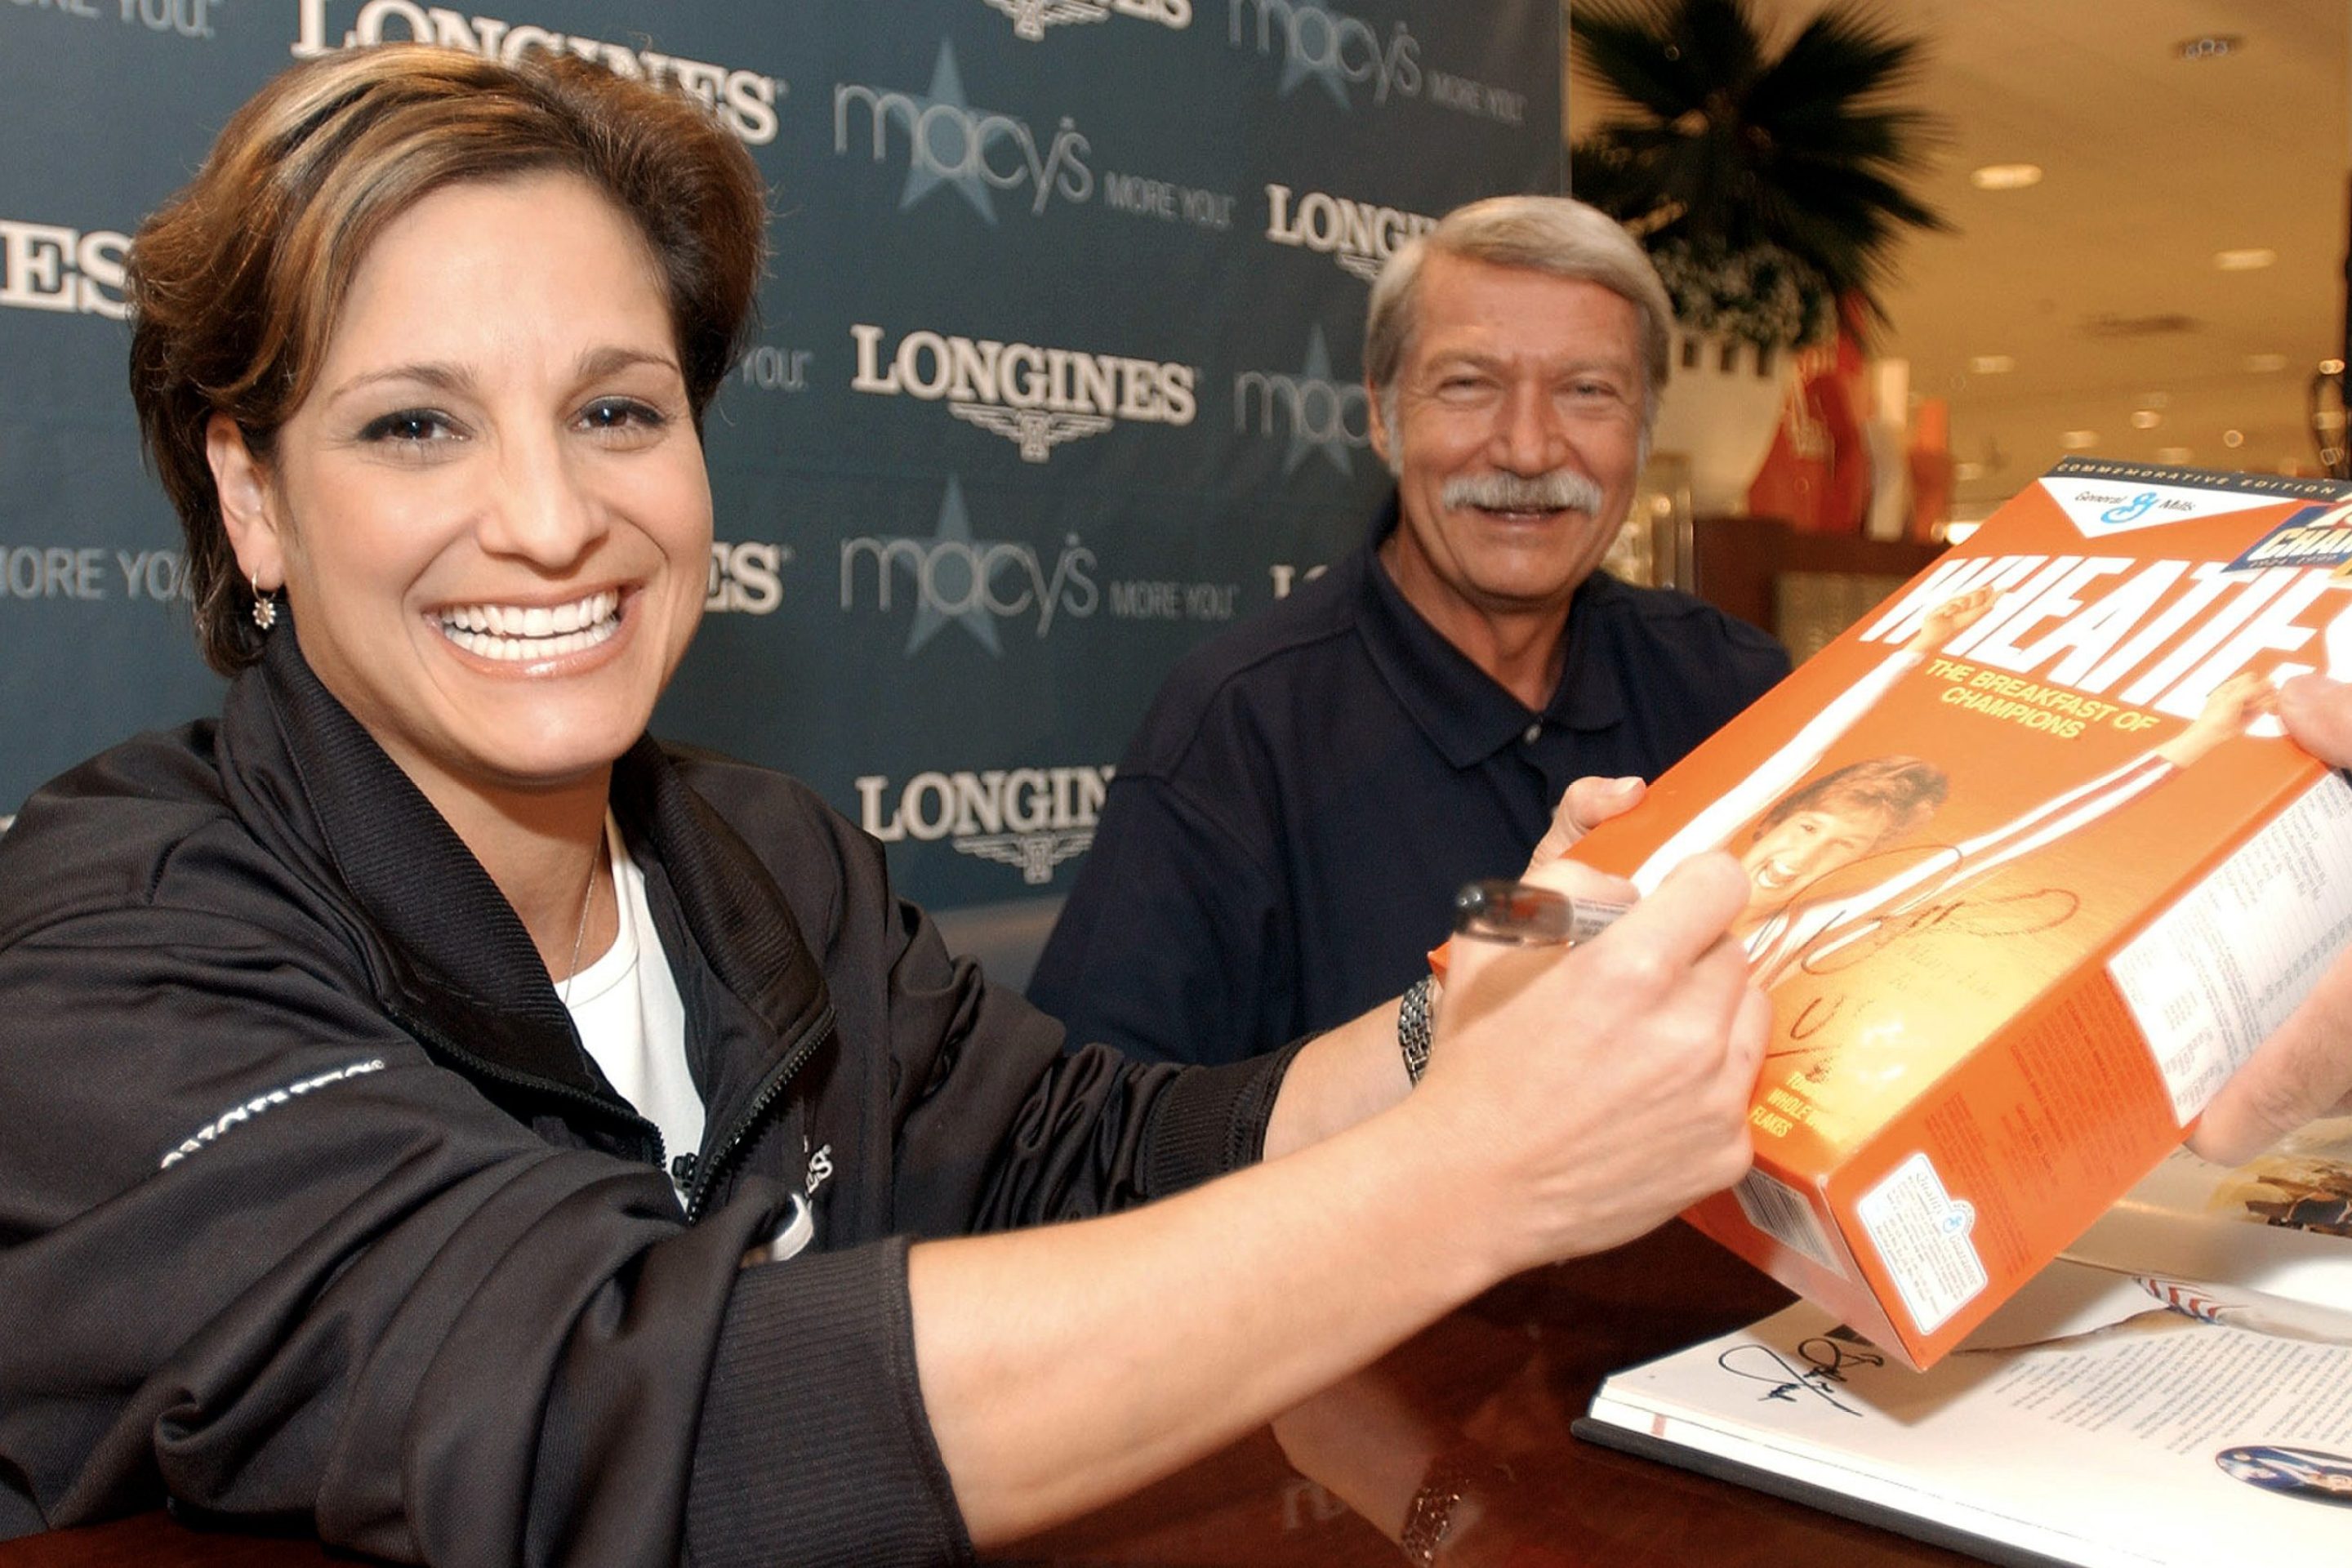 Mary Lou Retton signs a Wheaties box in 2003. By her side is her longtime coach, Bela Karolyi